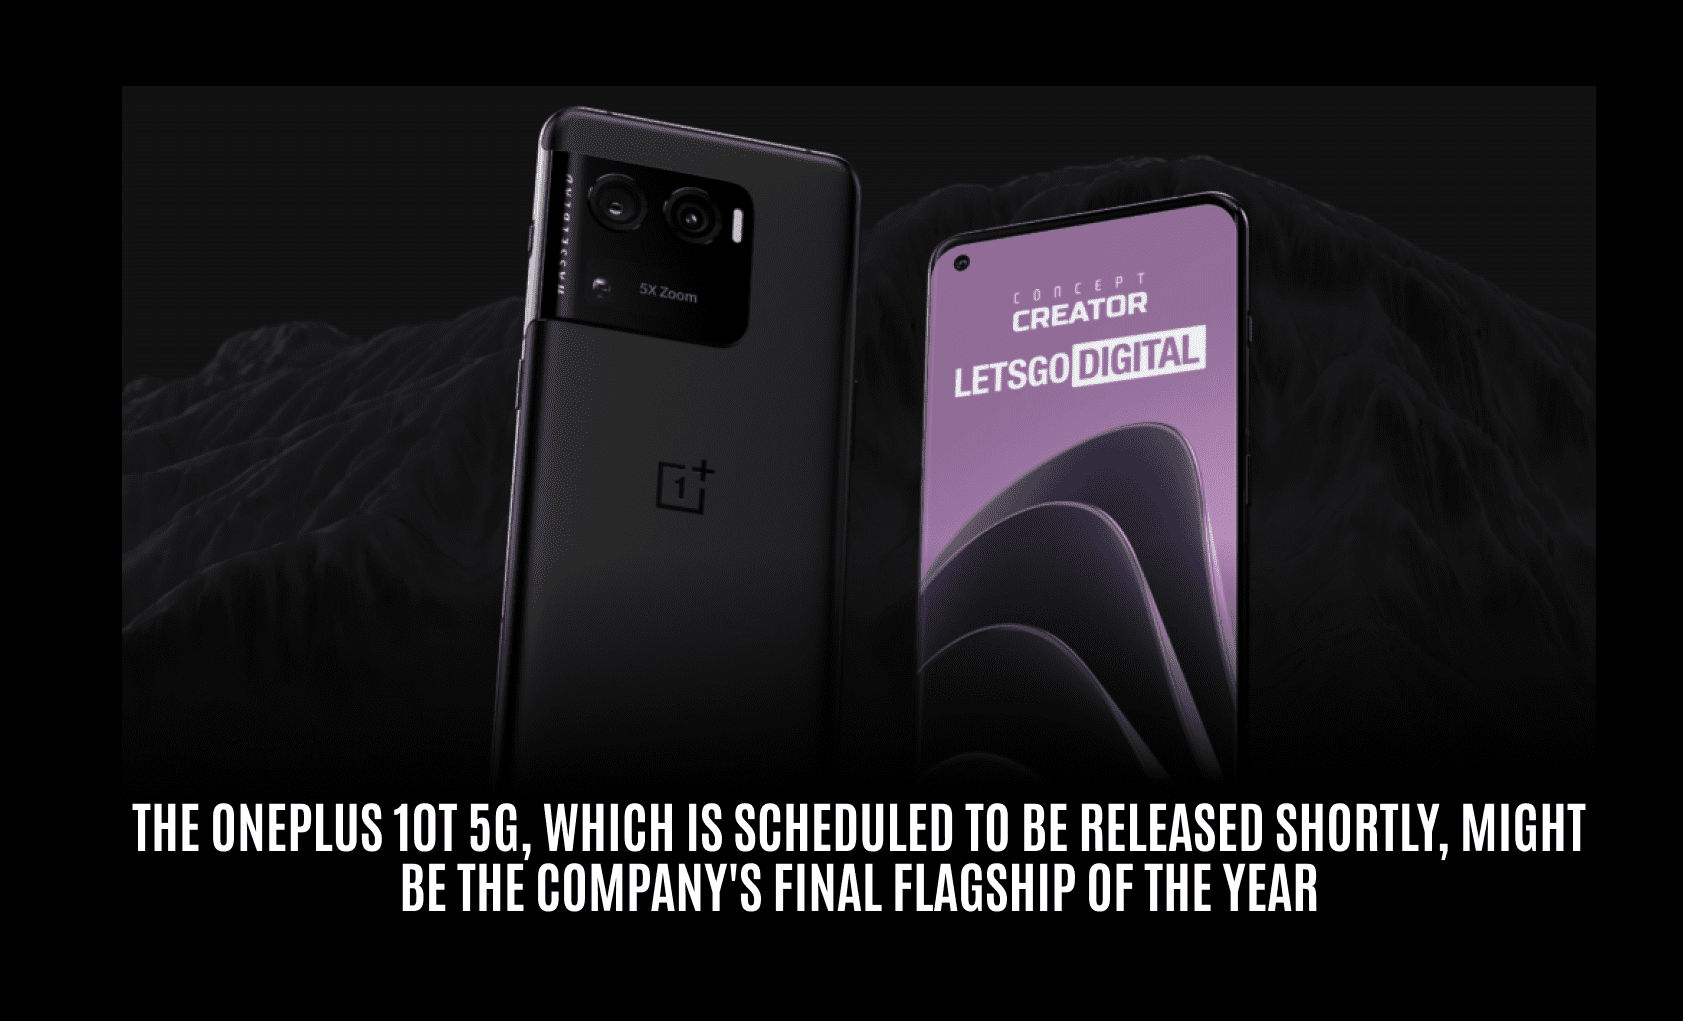 The OnePlus 10T 5G, which is scheduled to be released shortly, might be the company’s final flagship of the year